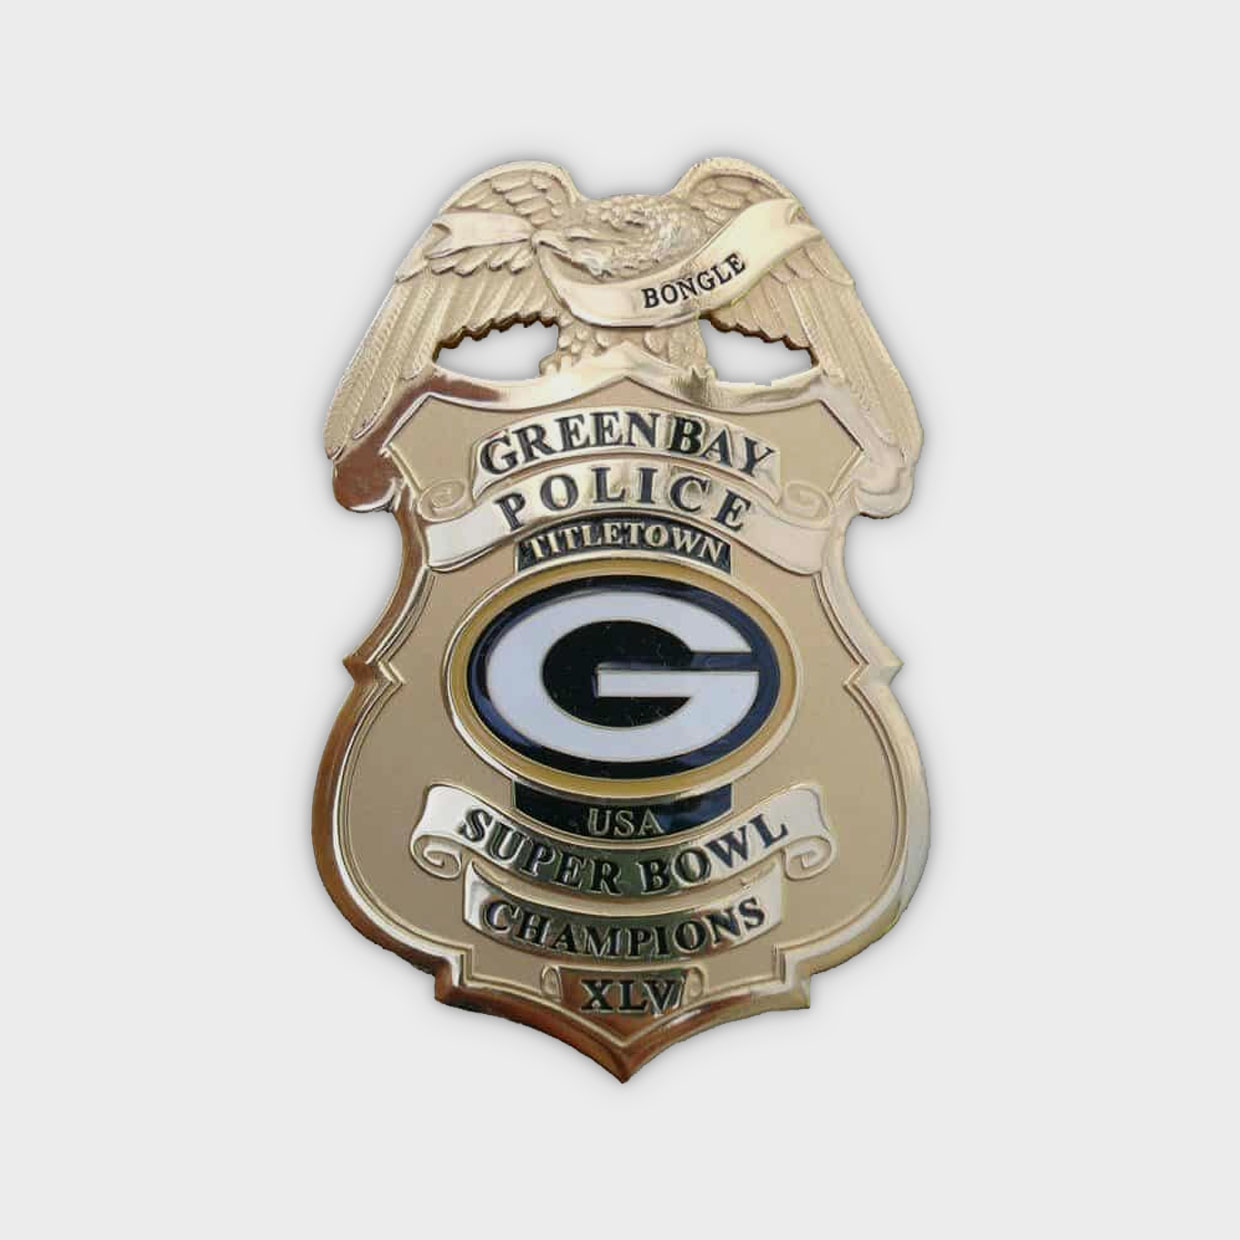 Green Bay Police Packers Super Bowl Badge